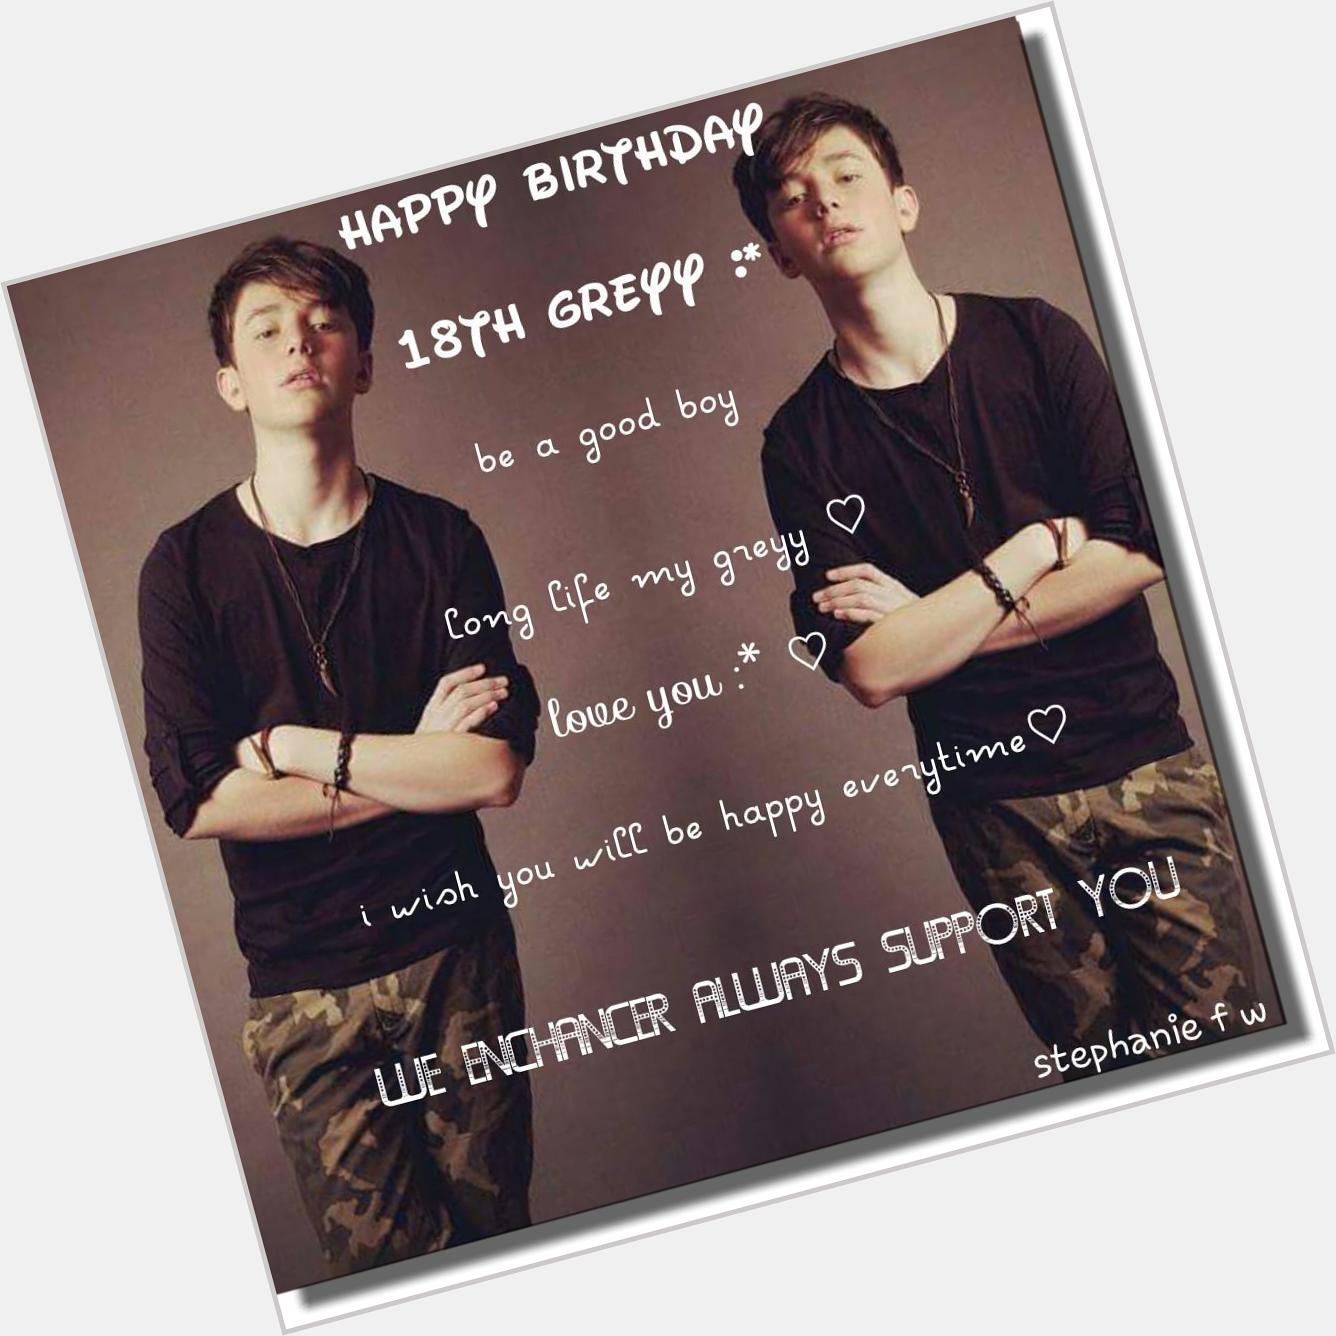  i wish you always be happy nothing else. 
Love you ({})hAppy birthday Greyson Michael Chance! ^^ 